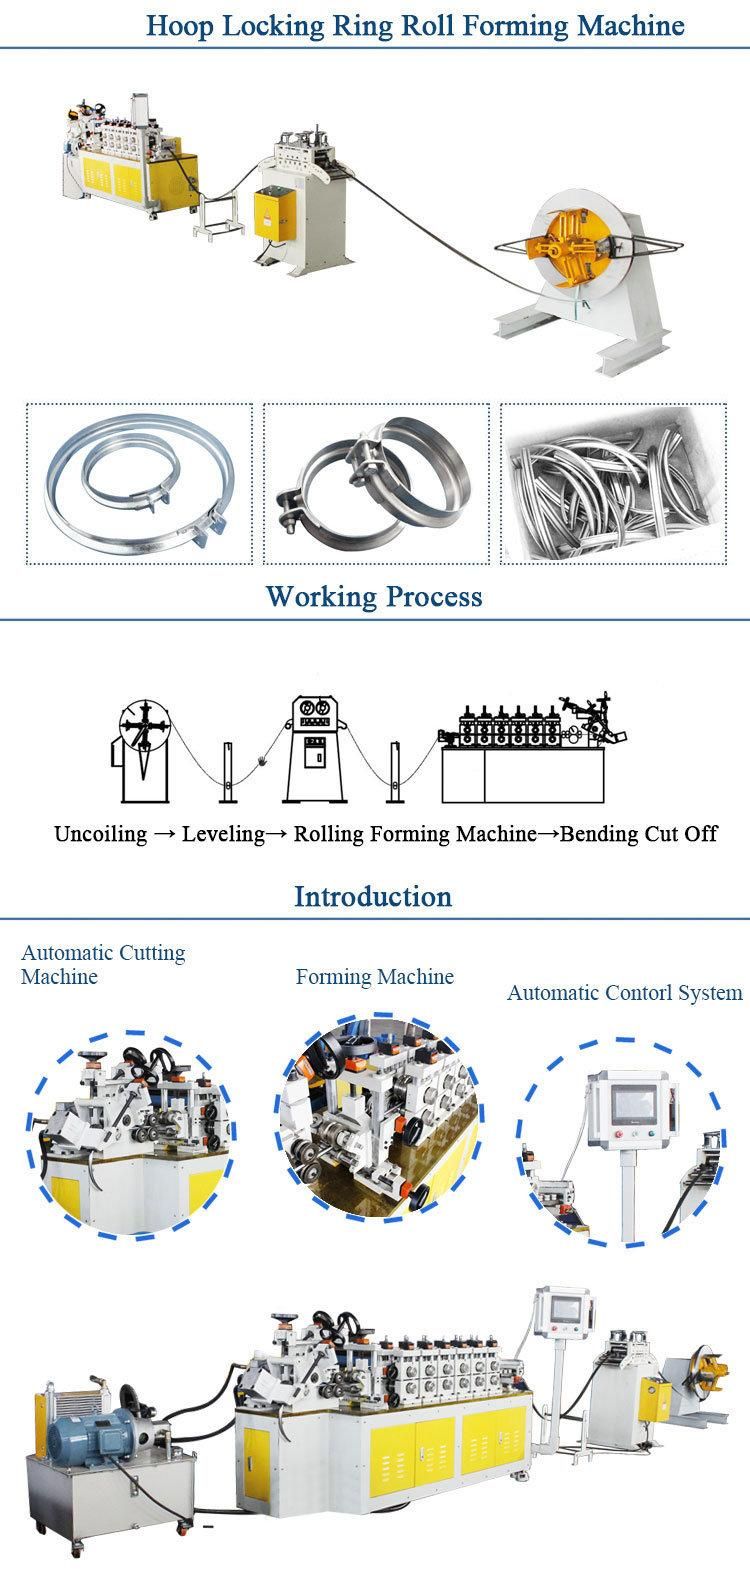 Automatic Bending V Band Clamp Hoop Locking Ring Cold Roll Forming Making Machine Firm in Structure